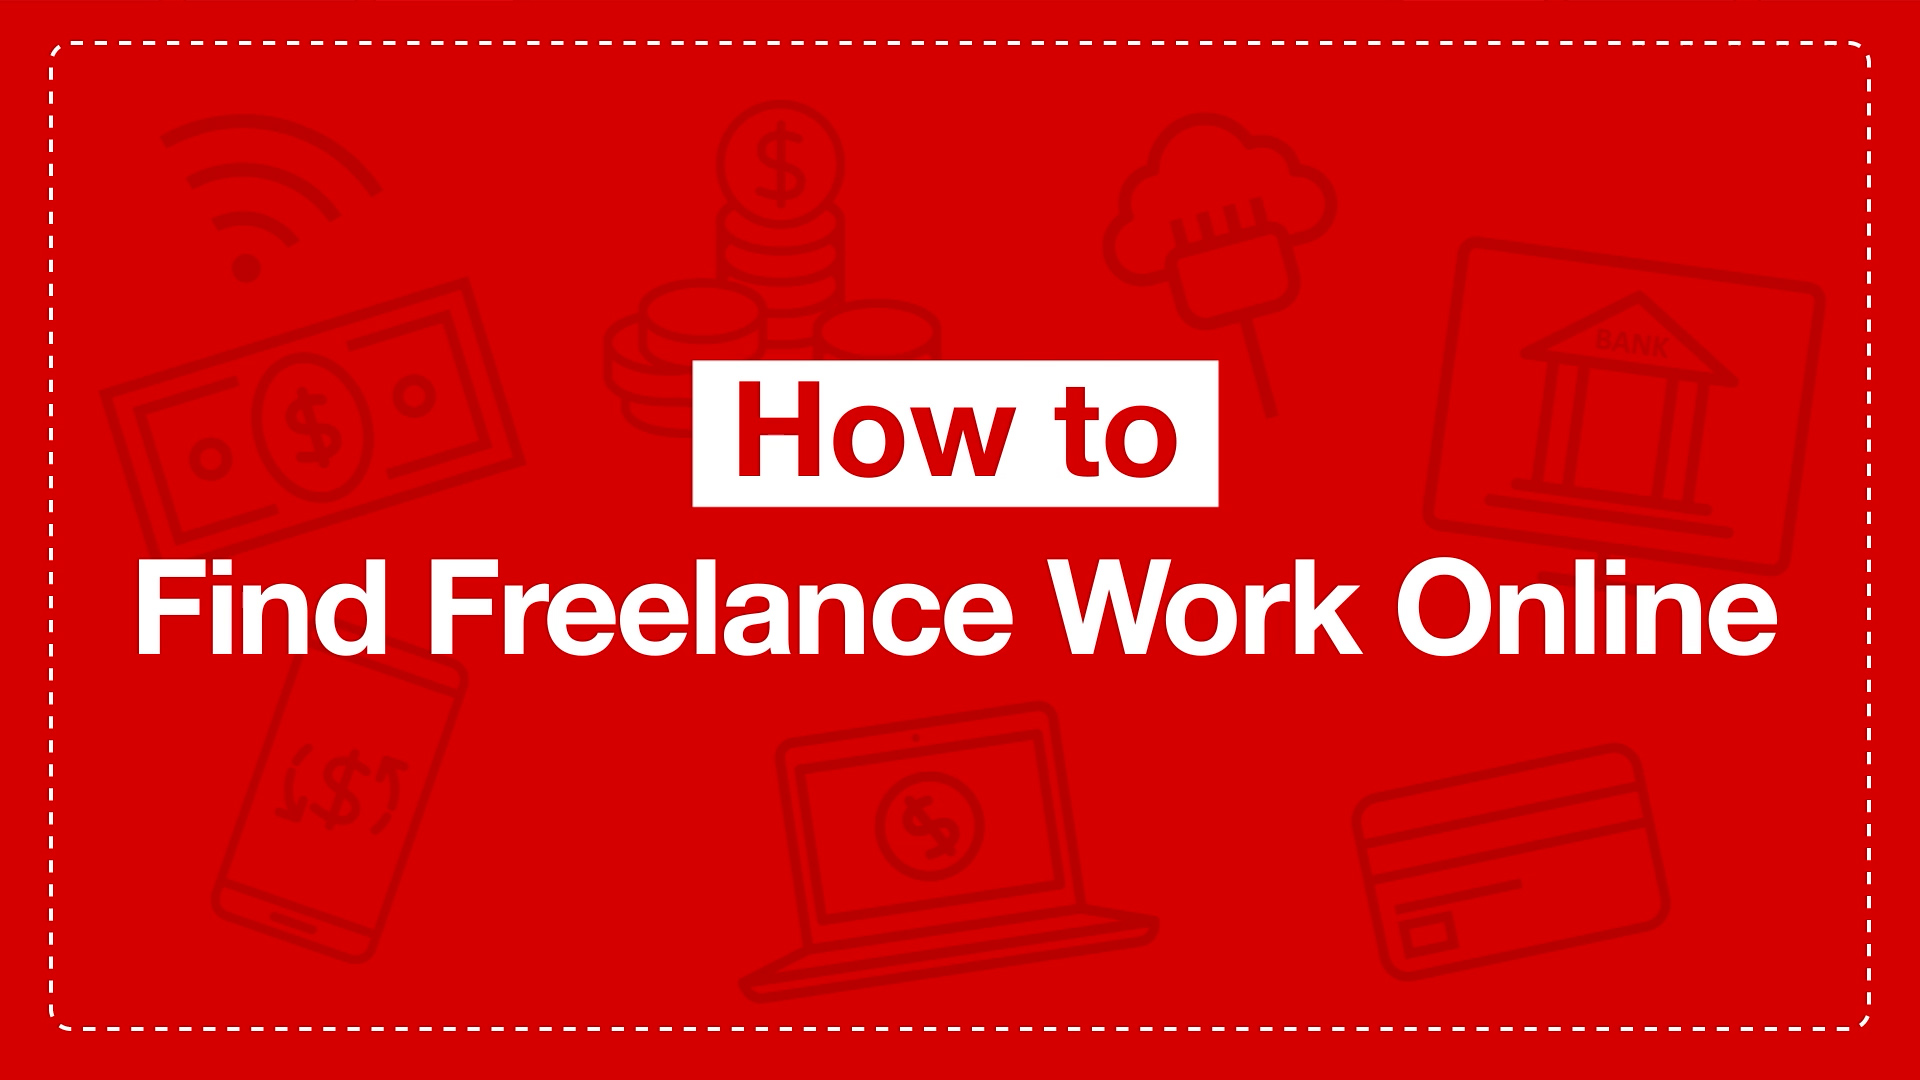 A red box containing the text: How to find freelance work